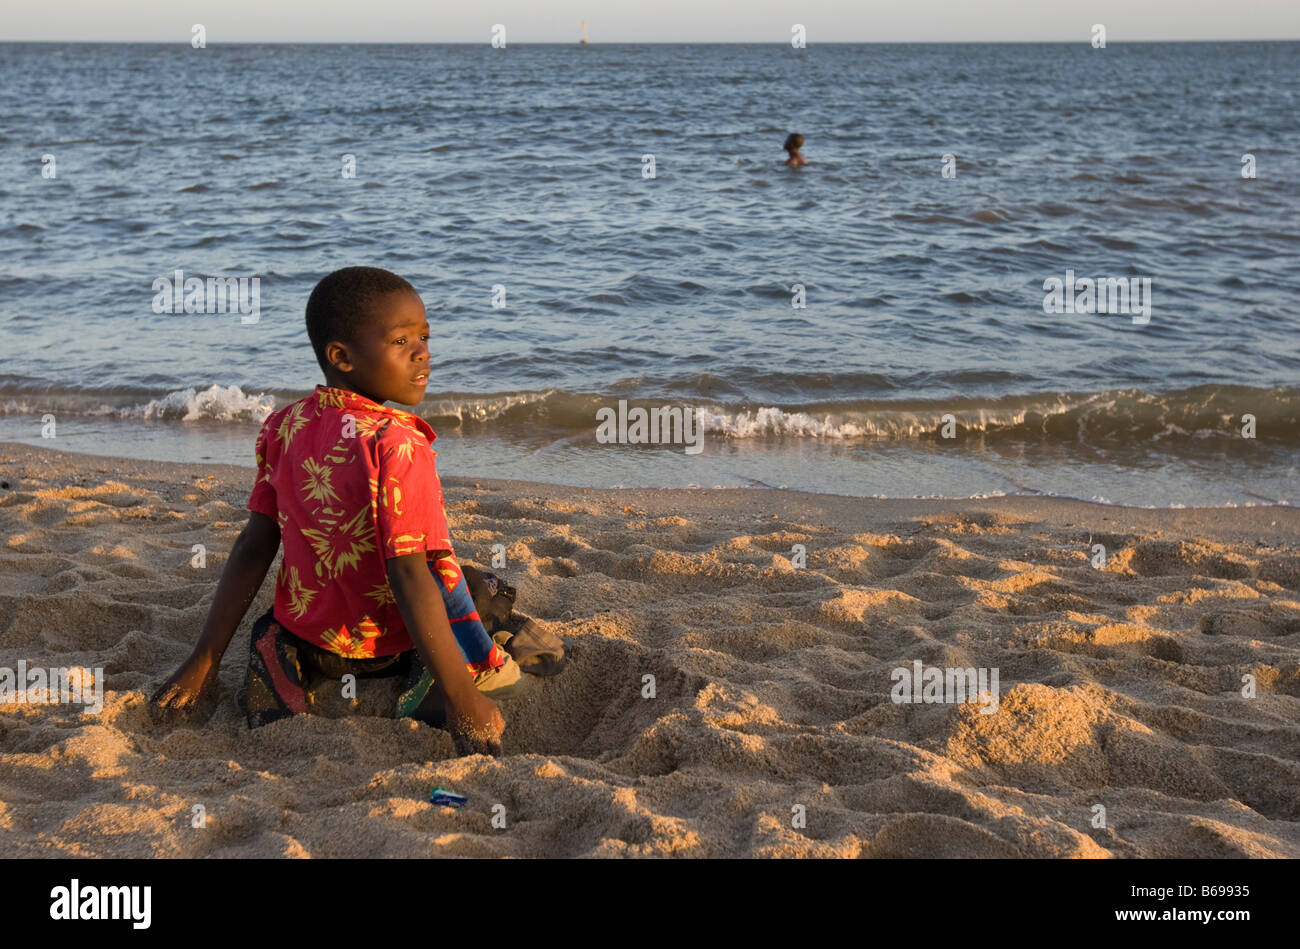 Africa Mozambique Maputo Portrait of young boy playing in sand along Indian Ocean on beach at sunset Stock Photo